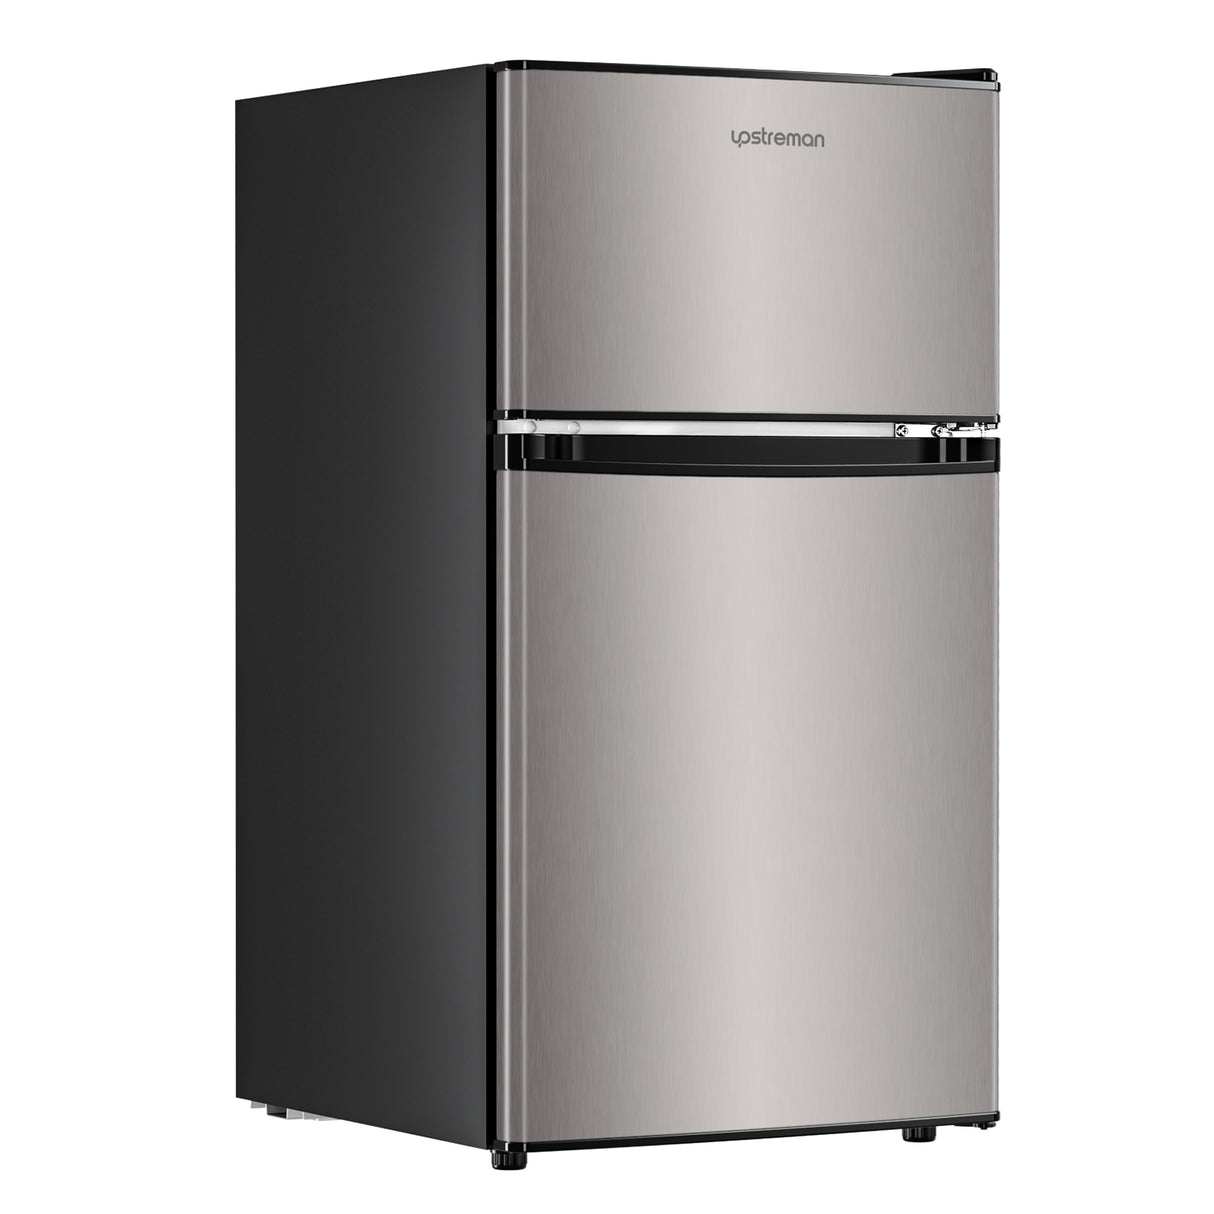 3.2 Cu ft. Compact Stainless Steel Refrigerator, White